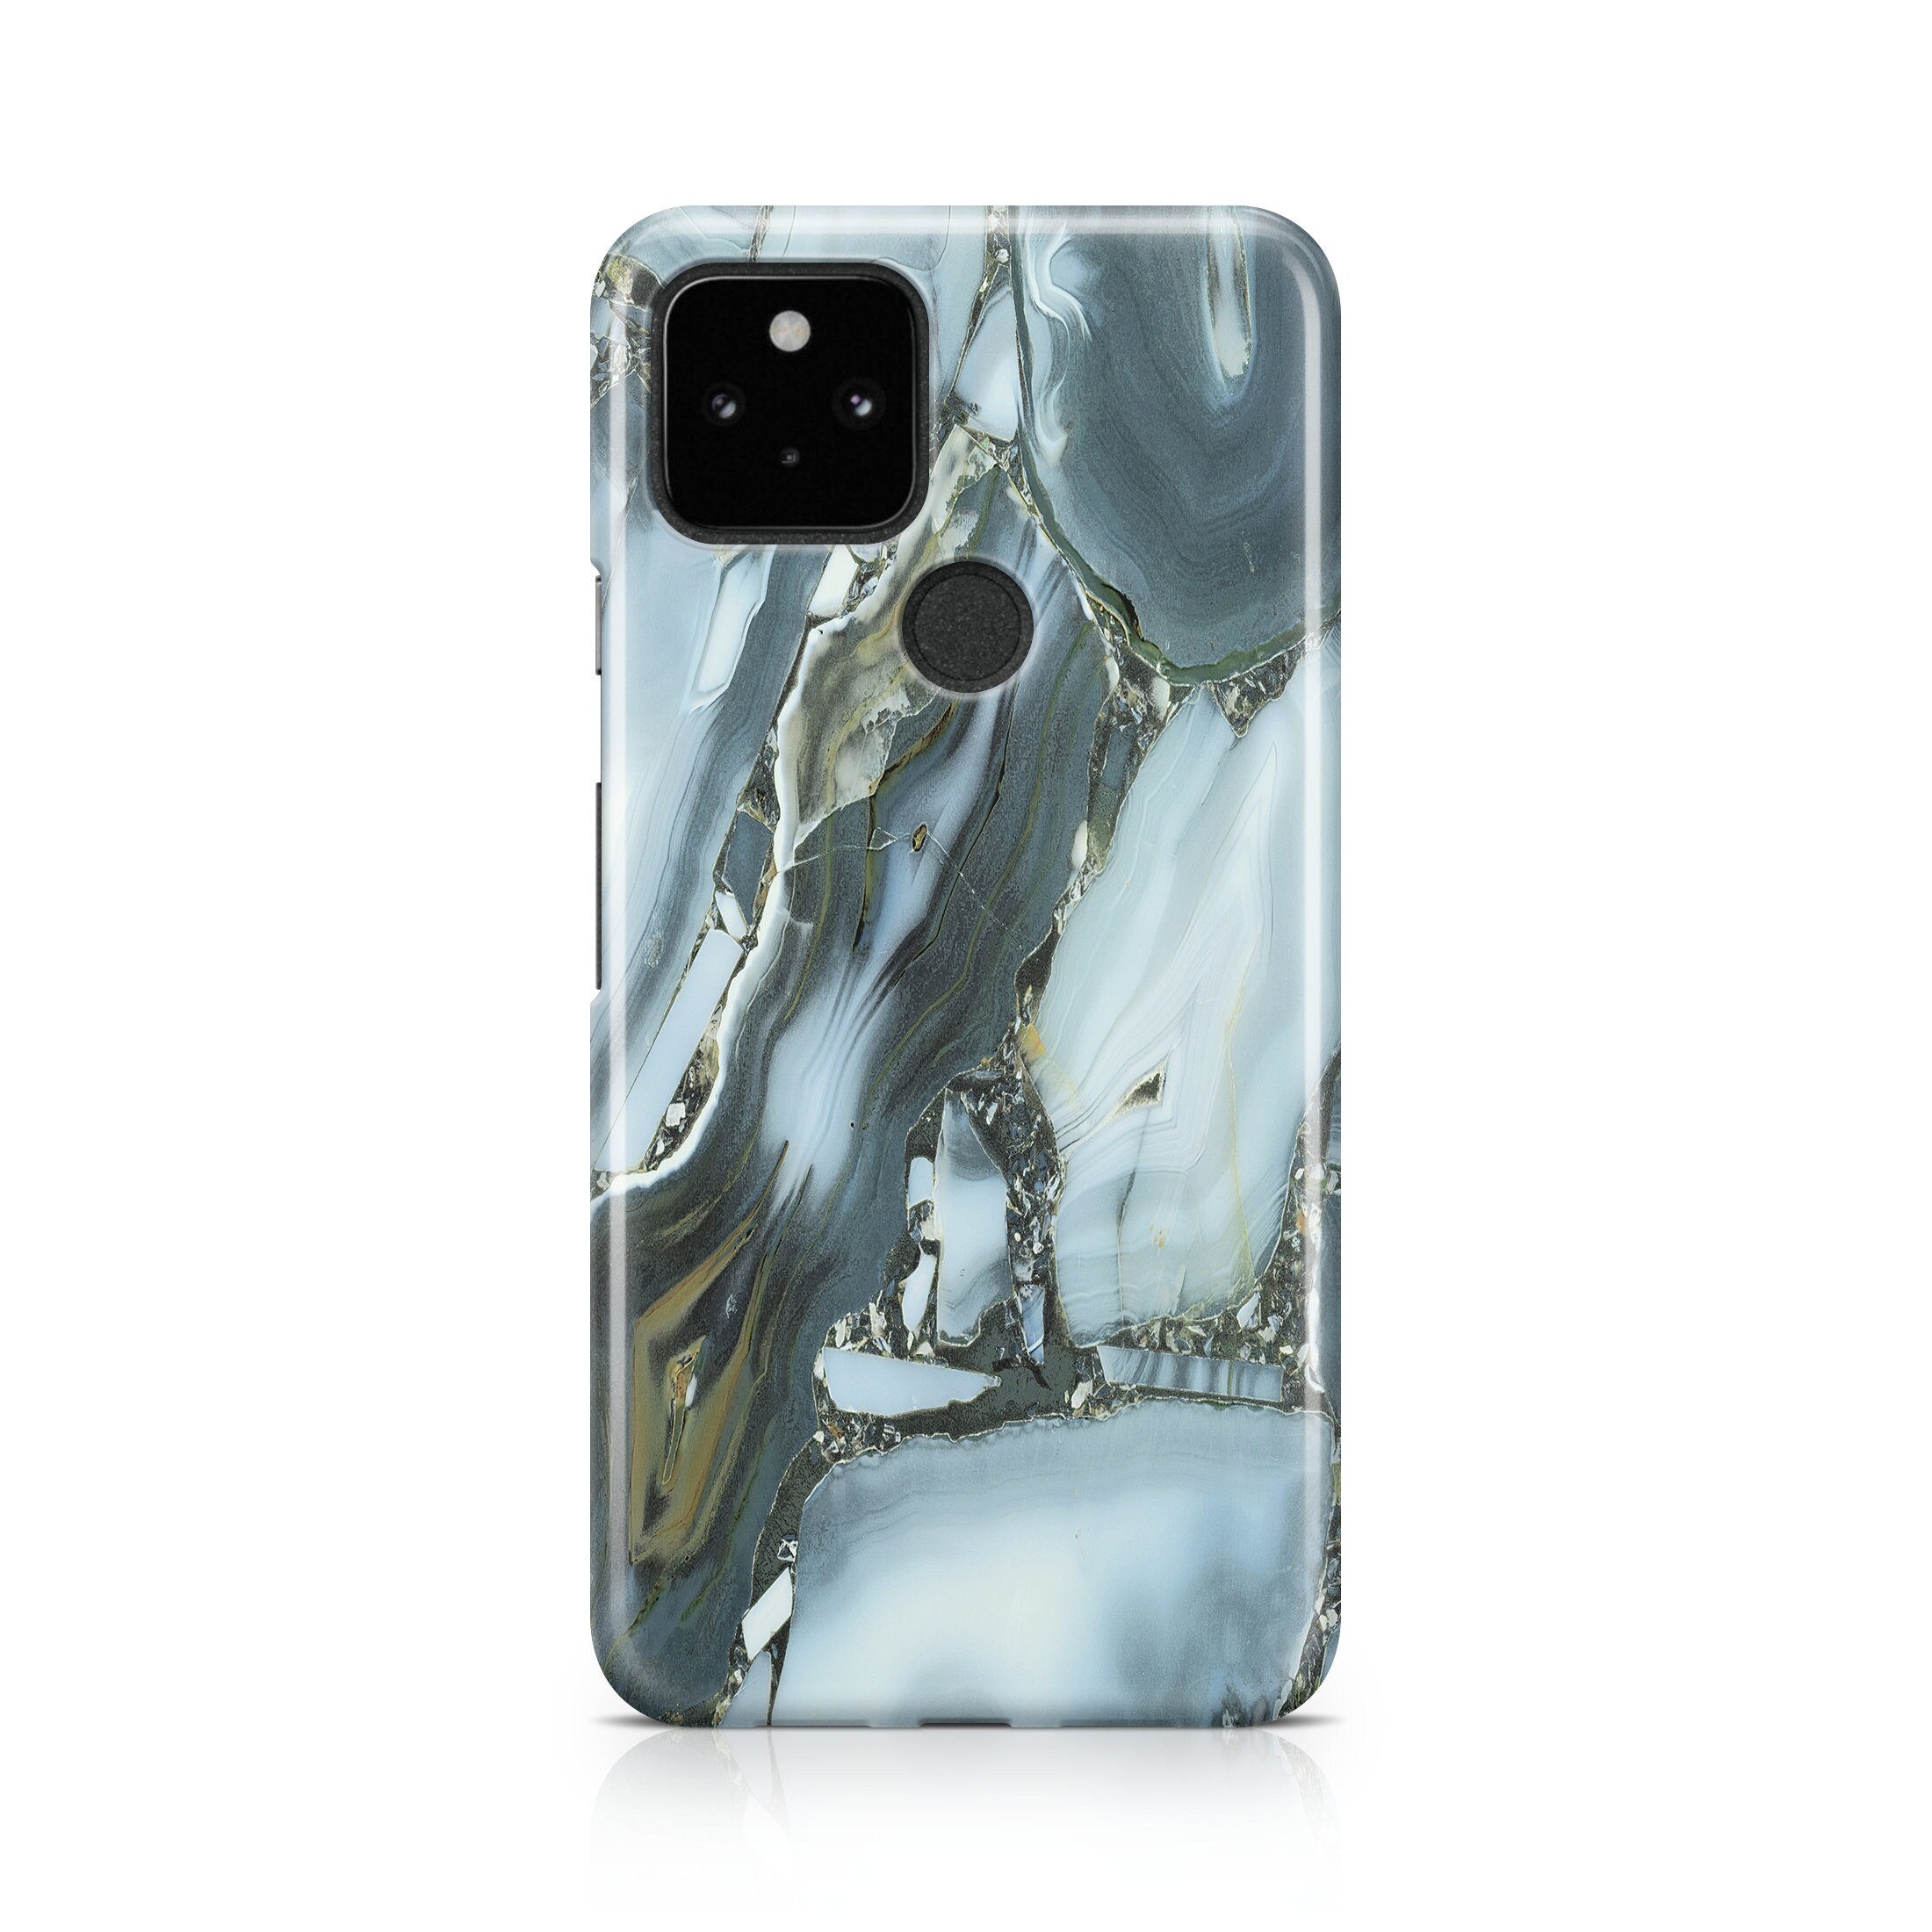 Blue Grey Agate Case Iphone 12 Pro Max Galaxy S20 Plus - Etsy